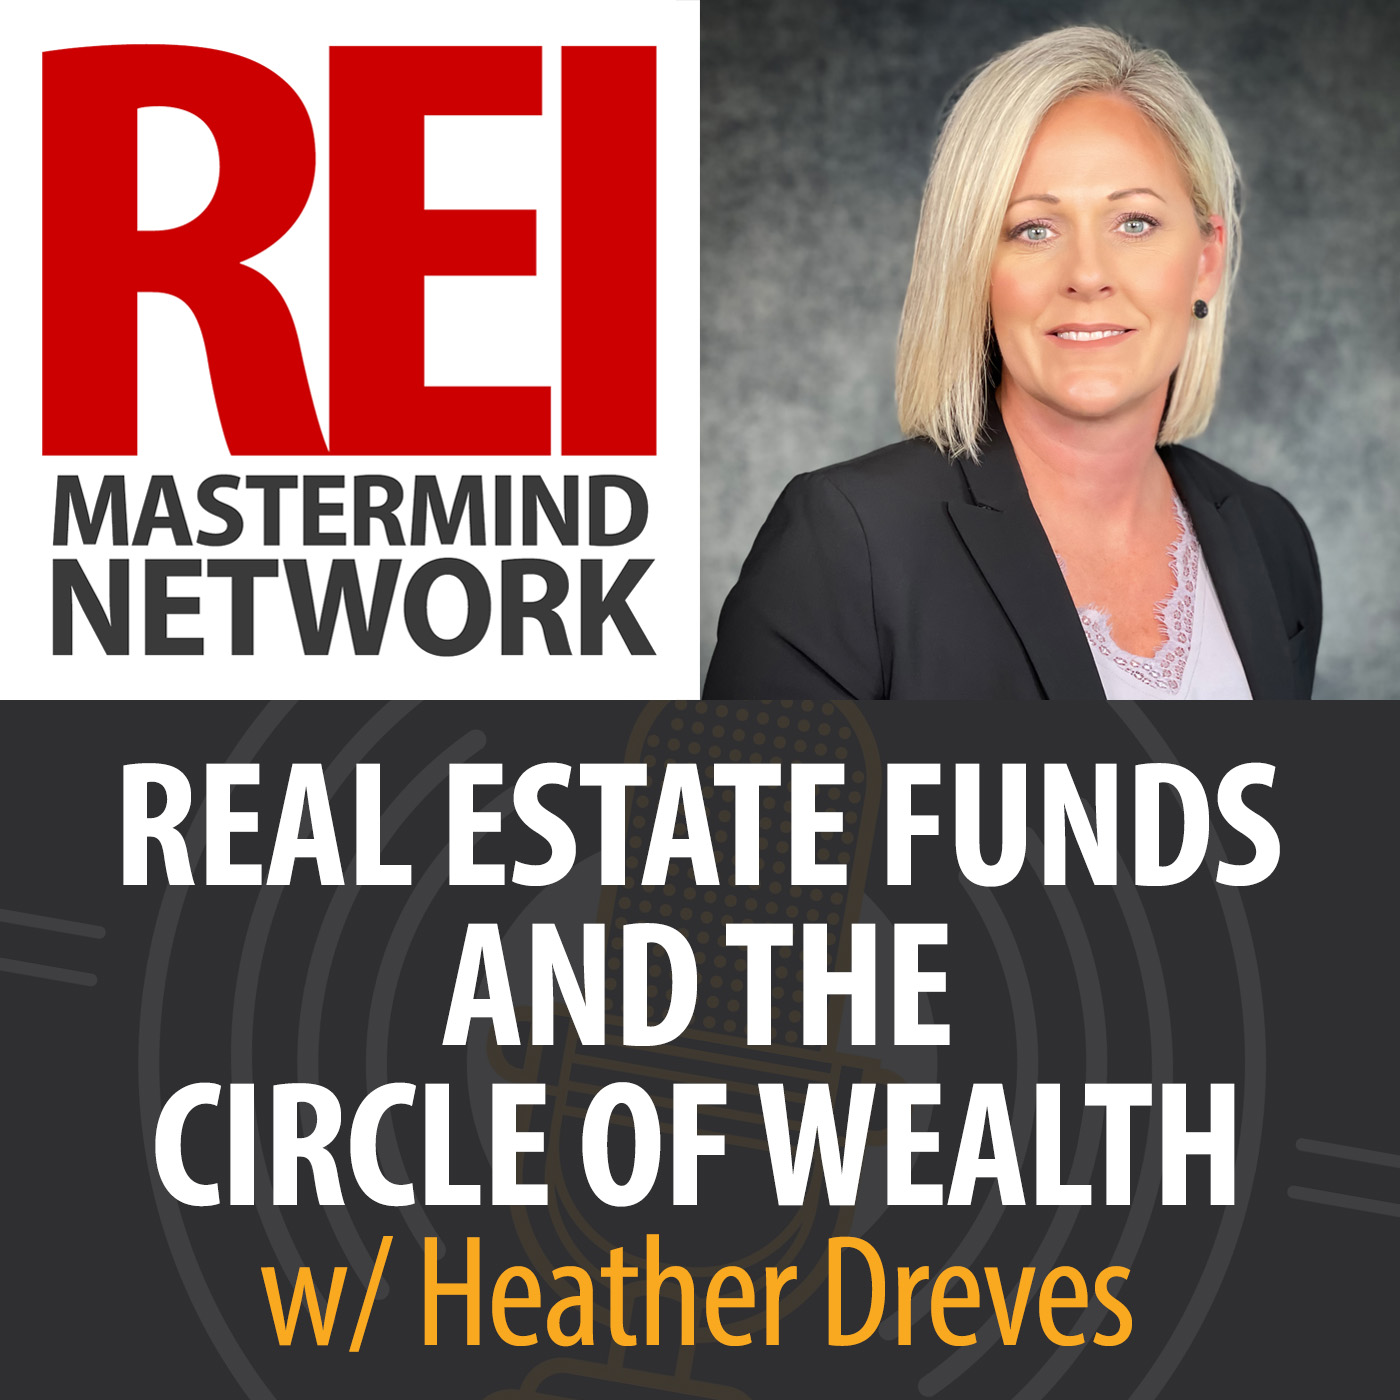 Real Estate Funds and The Circle of Wealth with Heather Dreves